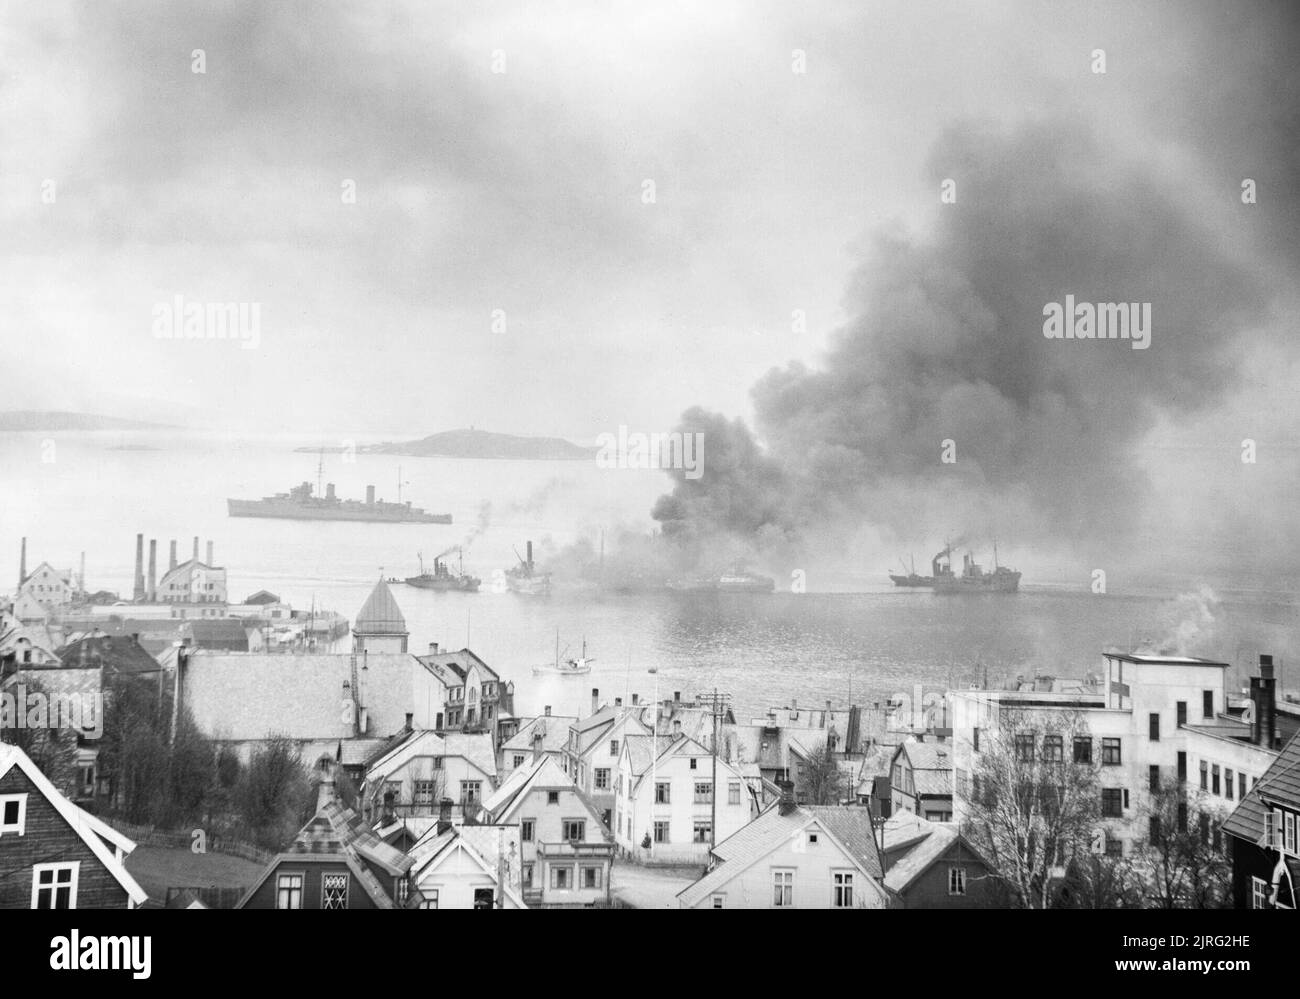 The Royal Navy during the Second World War British destroyers towing a captured petrol tanker, set ablaze by a German air raid, out into a Norwegian fjord to sink it in case of damage to other shipping. Part of the nearby town can be seen in the foreground. Stock Photo